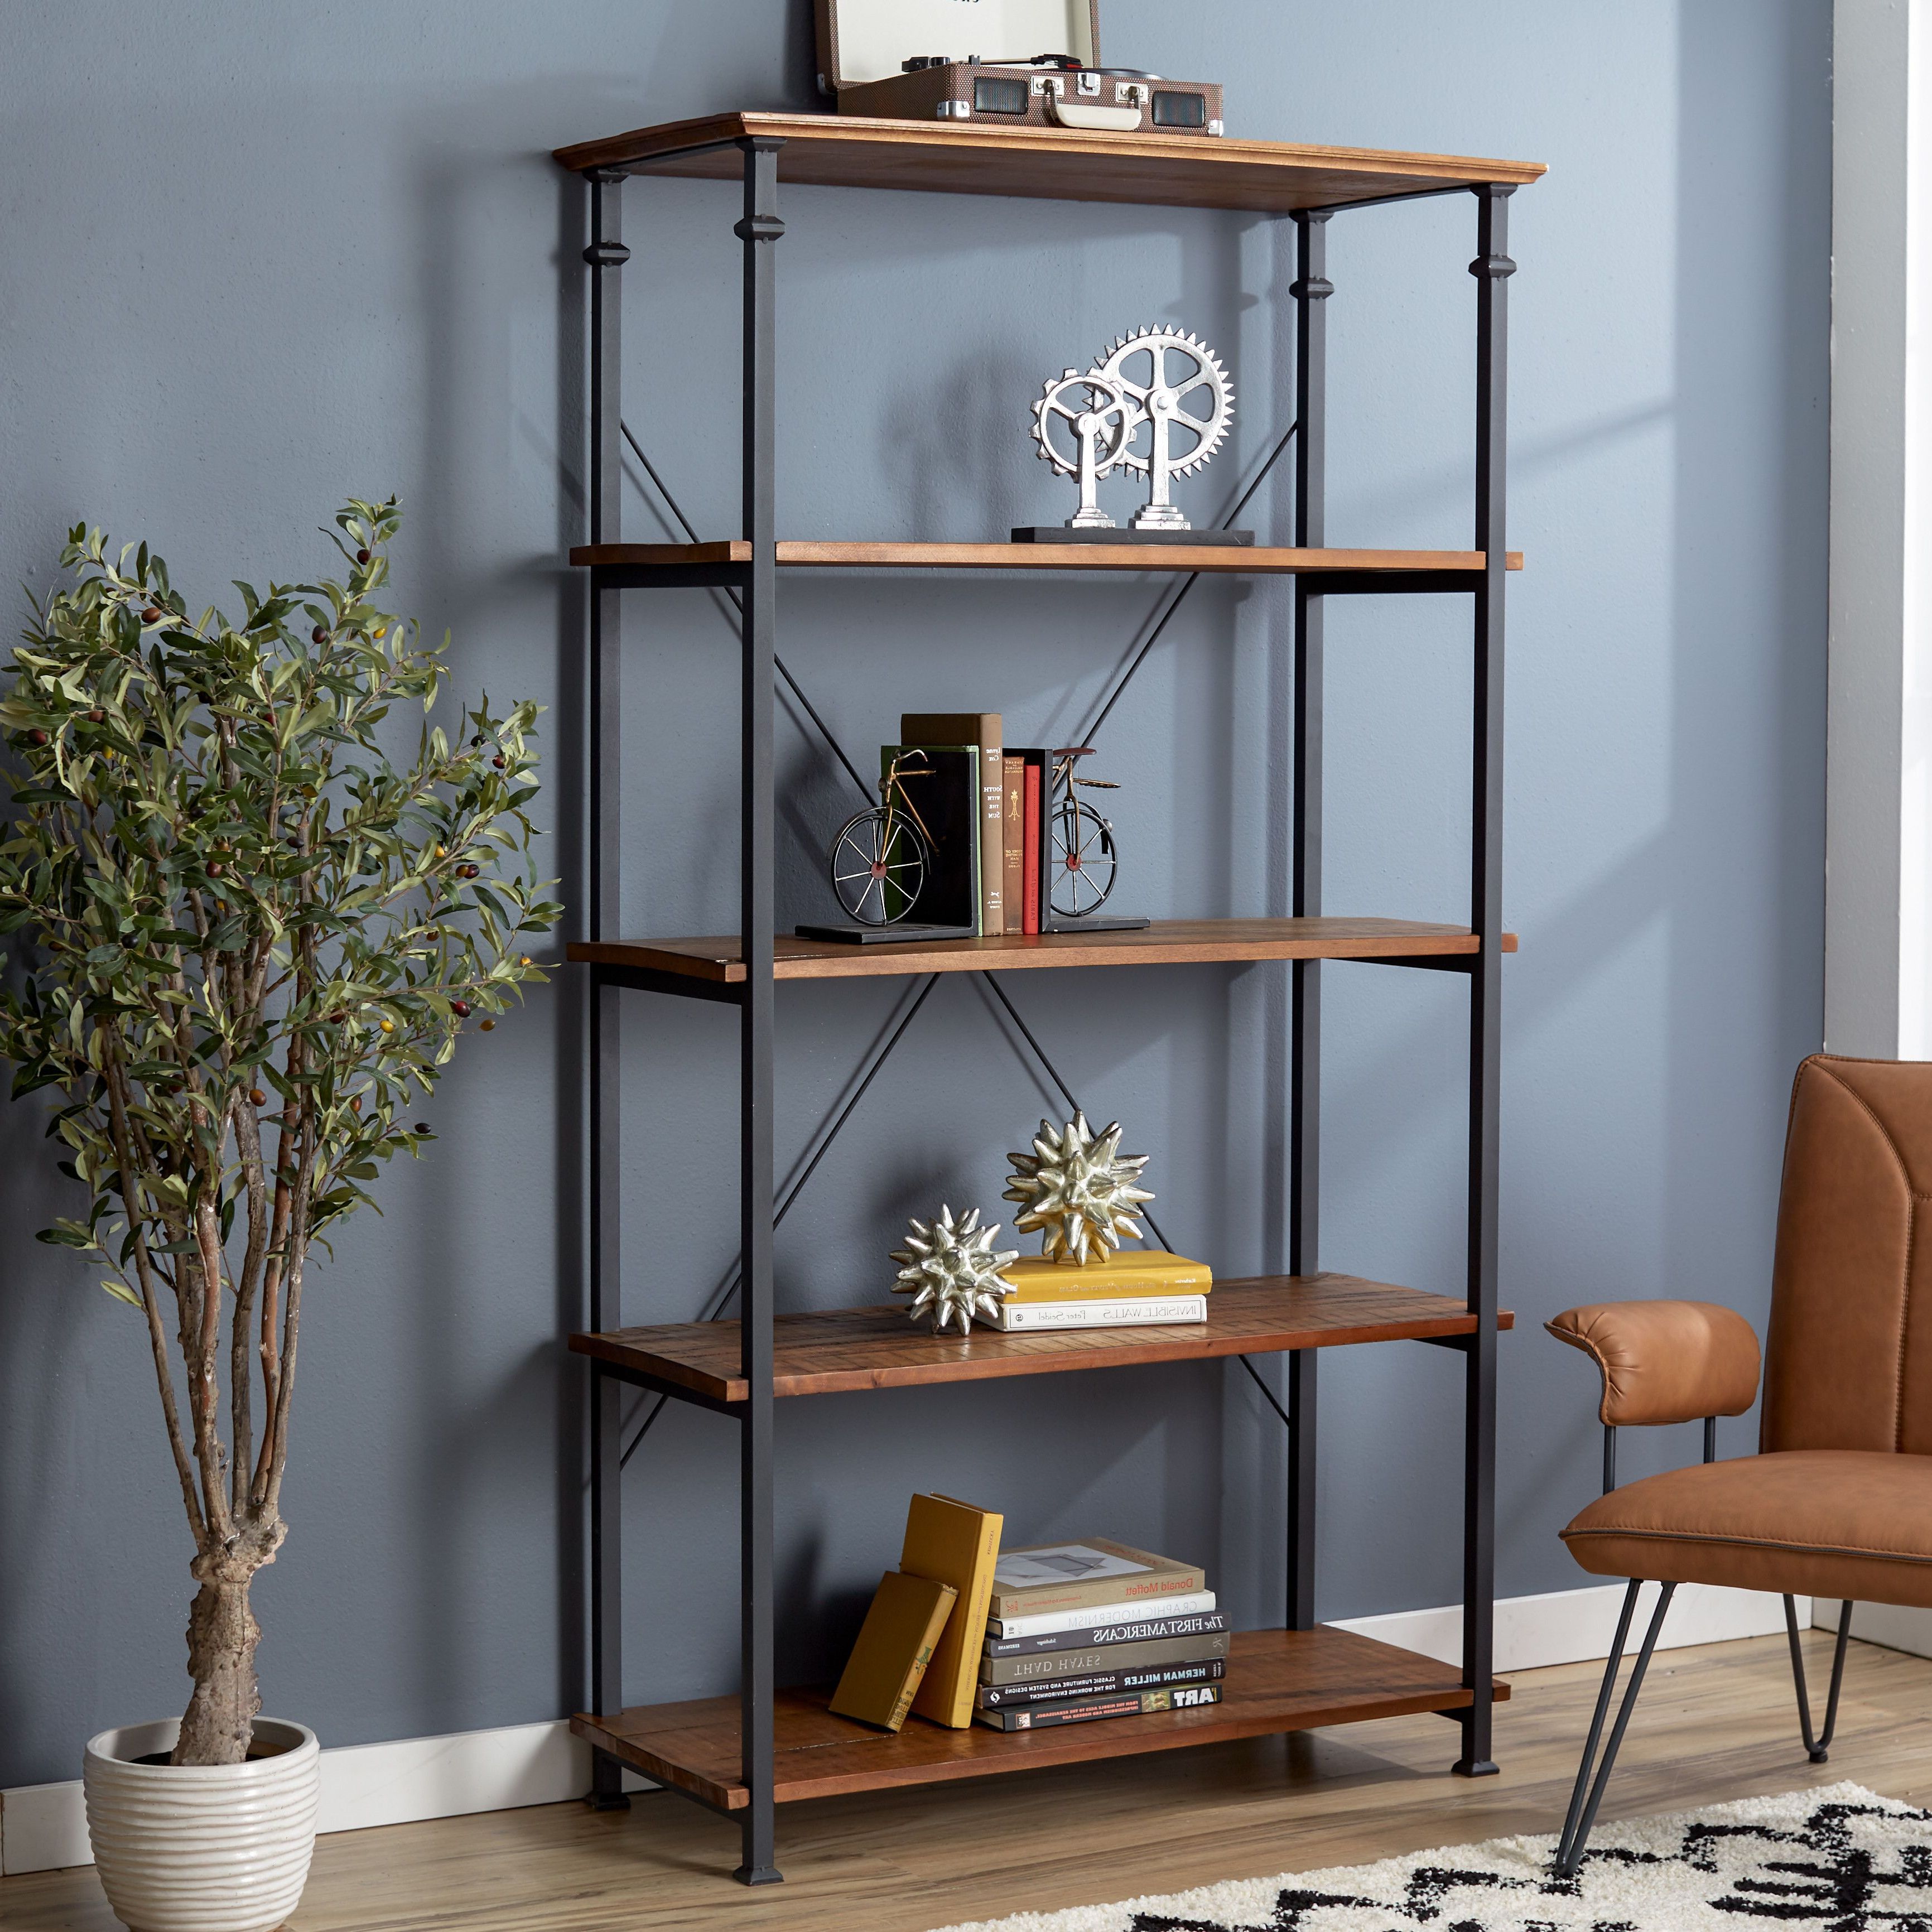 Whidden Etagere Bookcases For Well Liked Zona Etagere Bookcase (View 11 of 20)